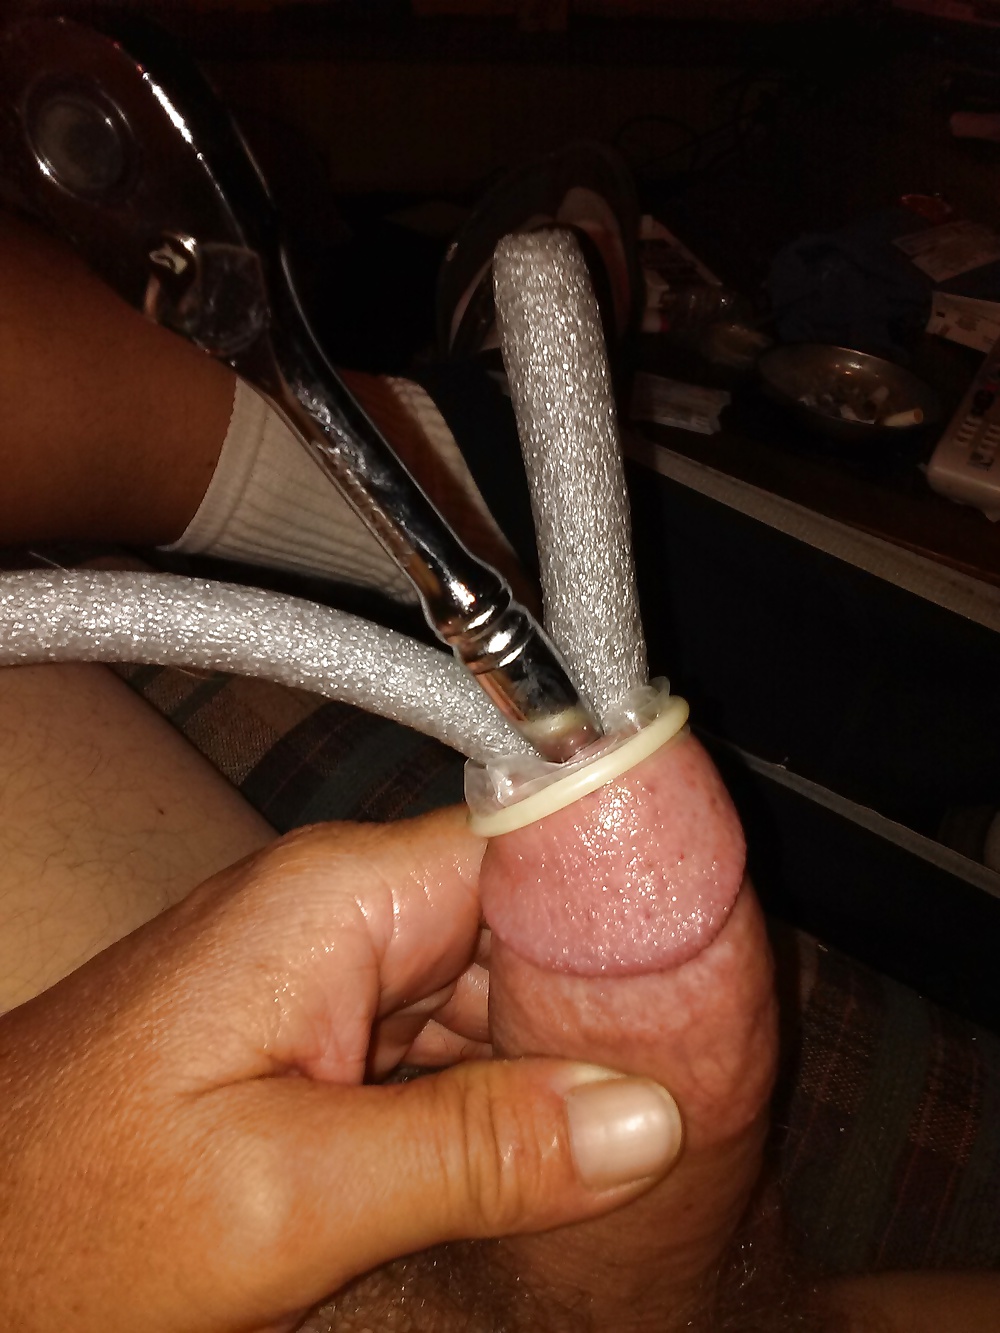 Watch More cock hole urethra stuffing - 15 Pics at xHamster.com! 